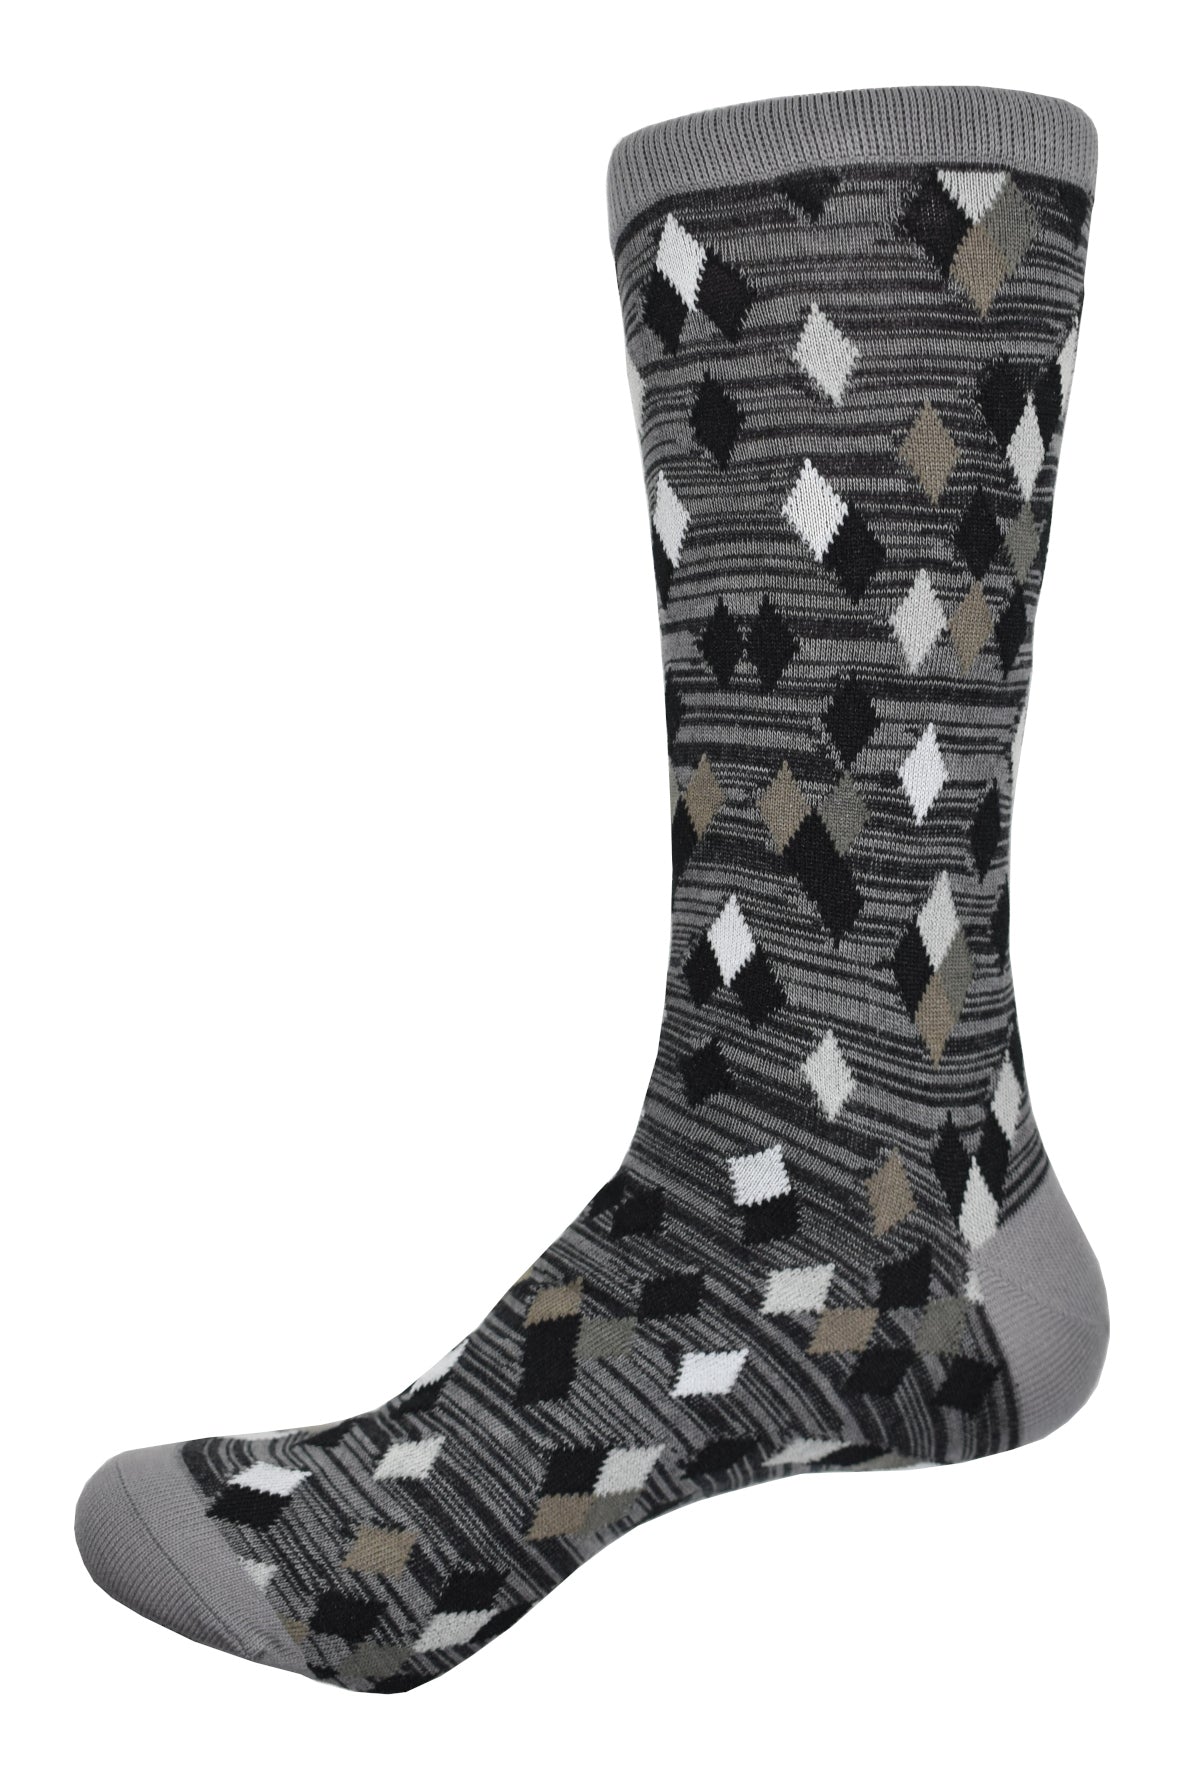 Enhance your style with the Marcello Charcoal and Gray Brushed Diamonds socks. Made of 97% mercerized cotton and 3% lycra, it offers comfort while its melange stripe effect and floating diamonds create a unique pattern that perfectly matches gray or black bottoms. Elevate your look with these elegant socks.